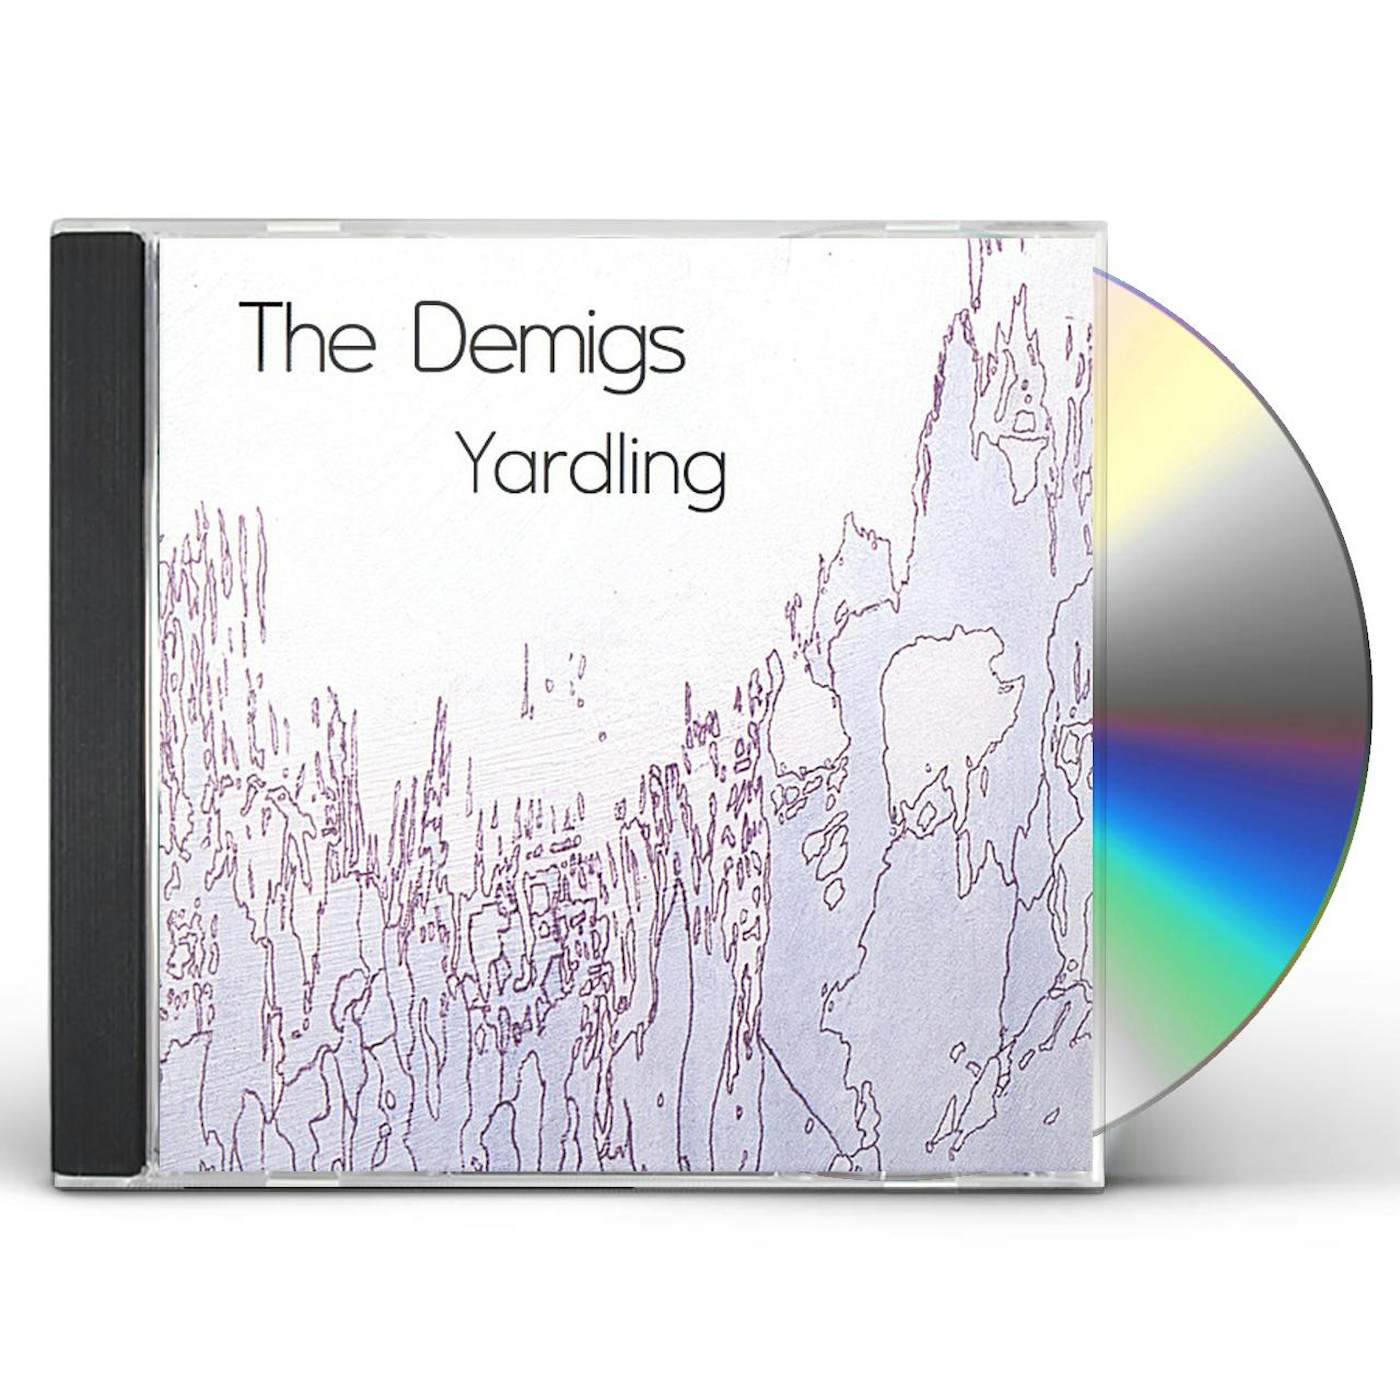 The Demigs YARDLING CD